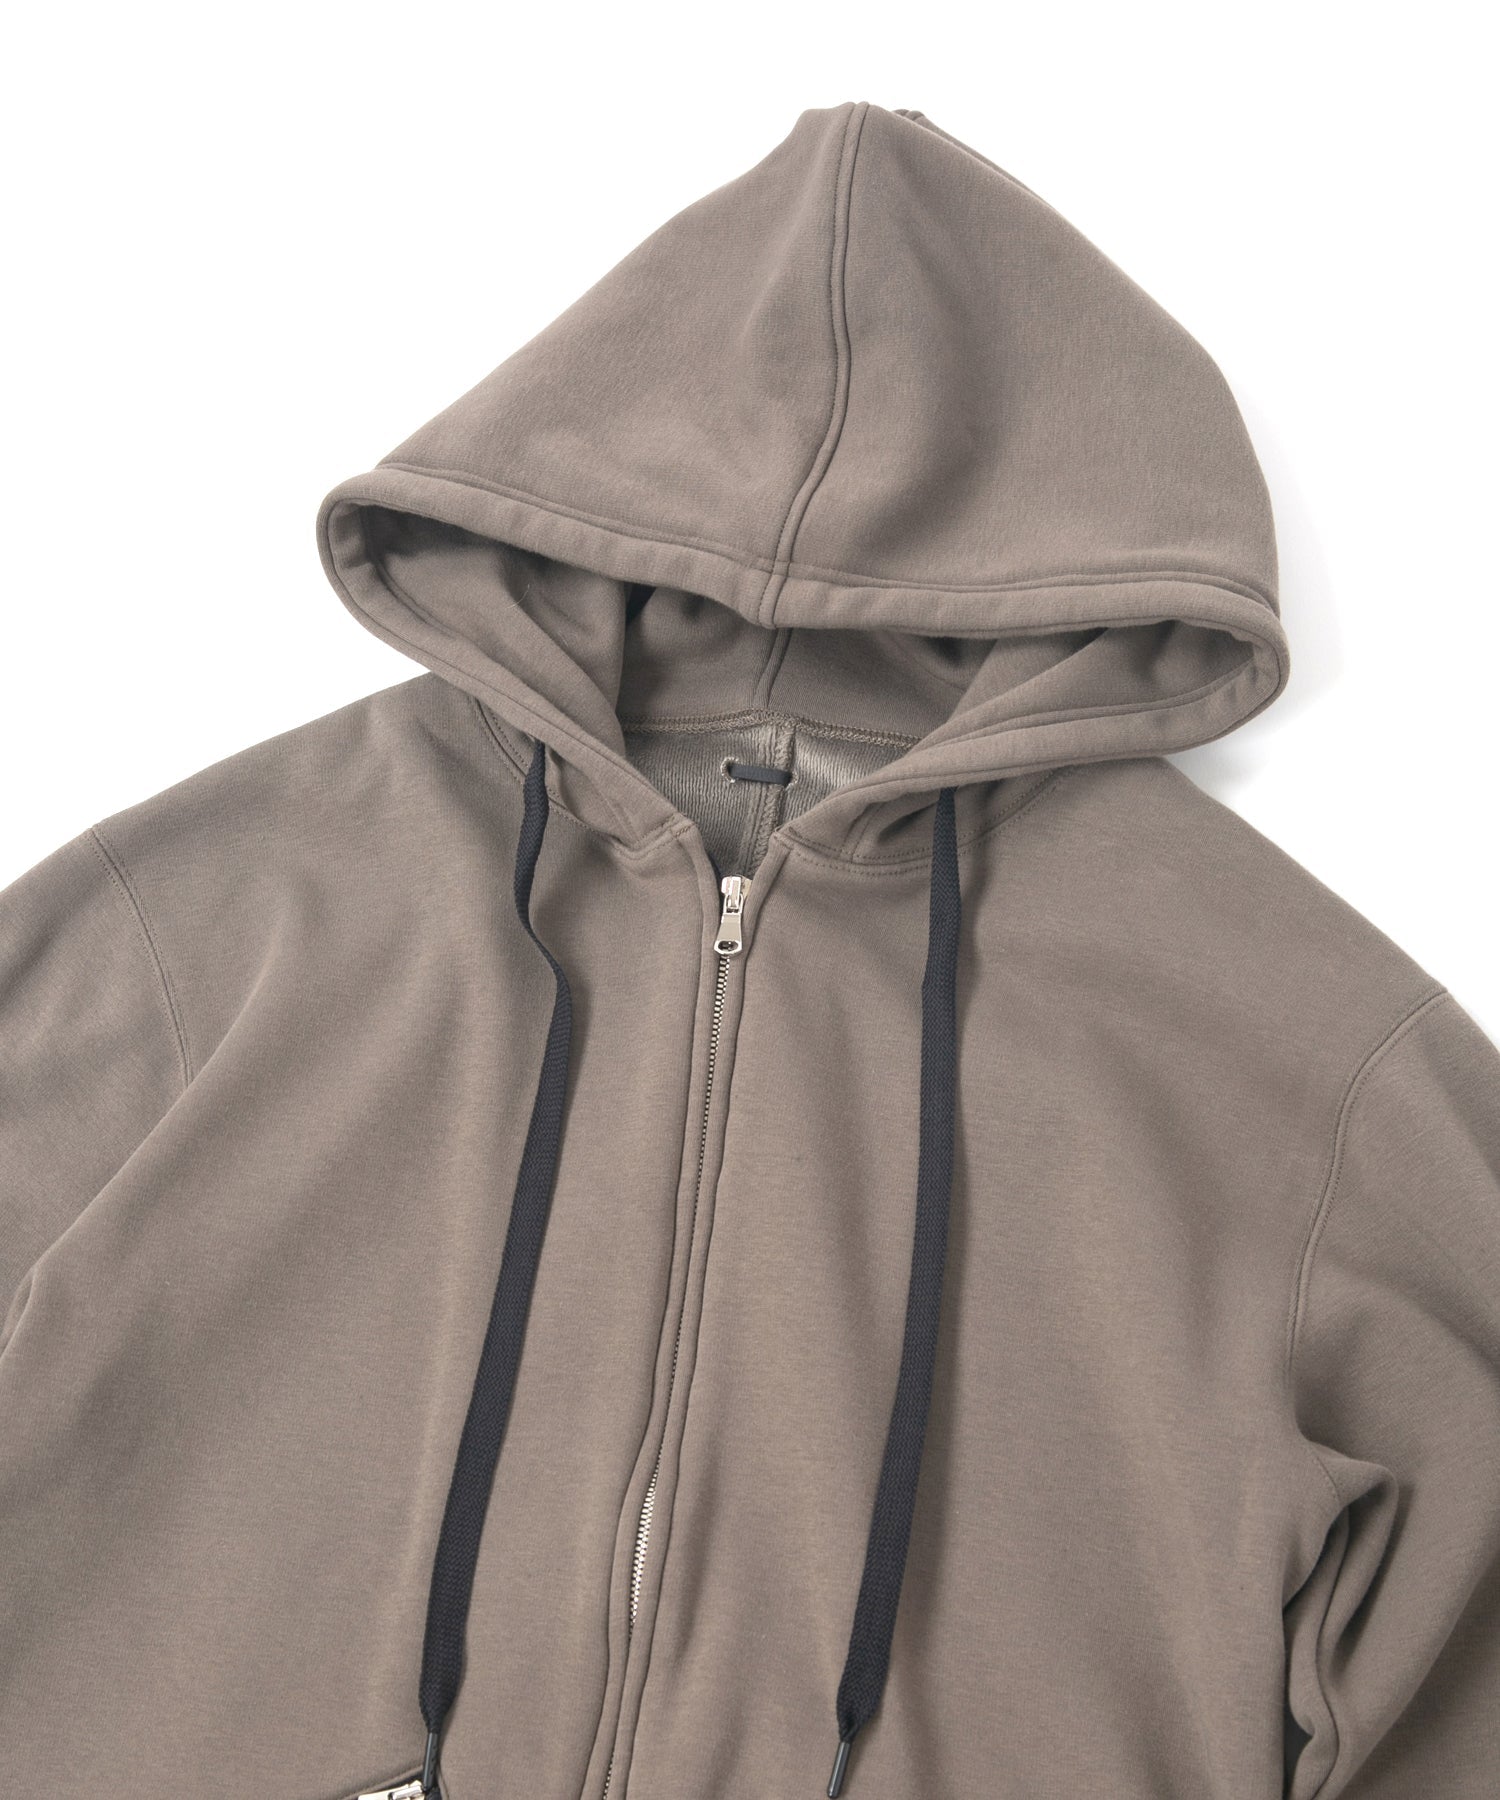 Stretch Cotton Polyester Knit Backside Velor finish Zip up Hoodie